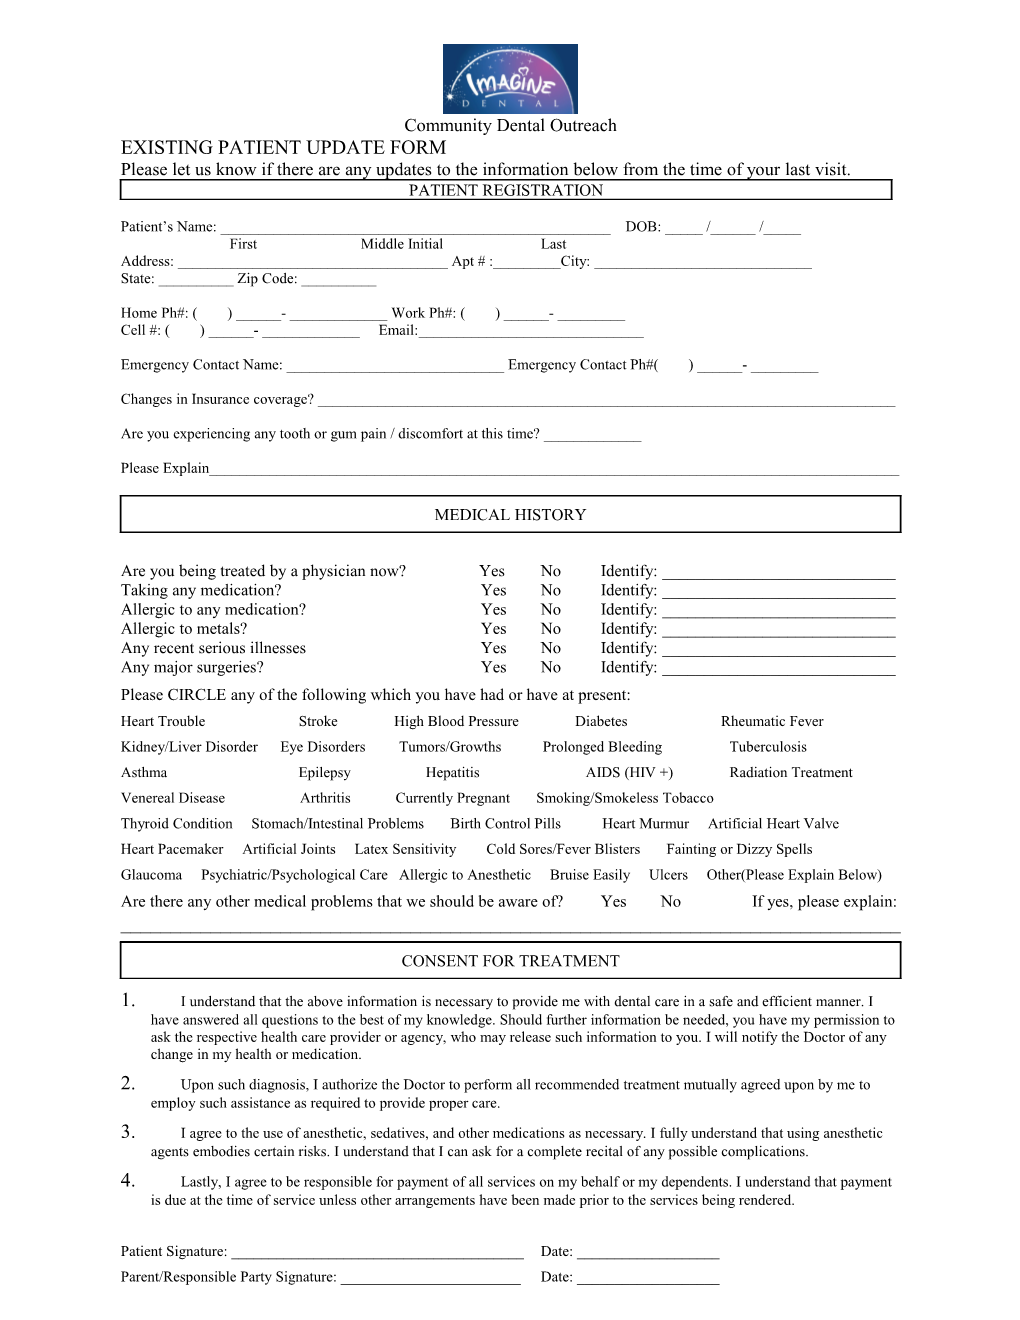 Existing Patient Update Form English